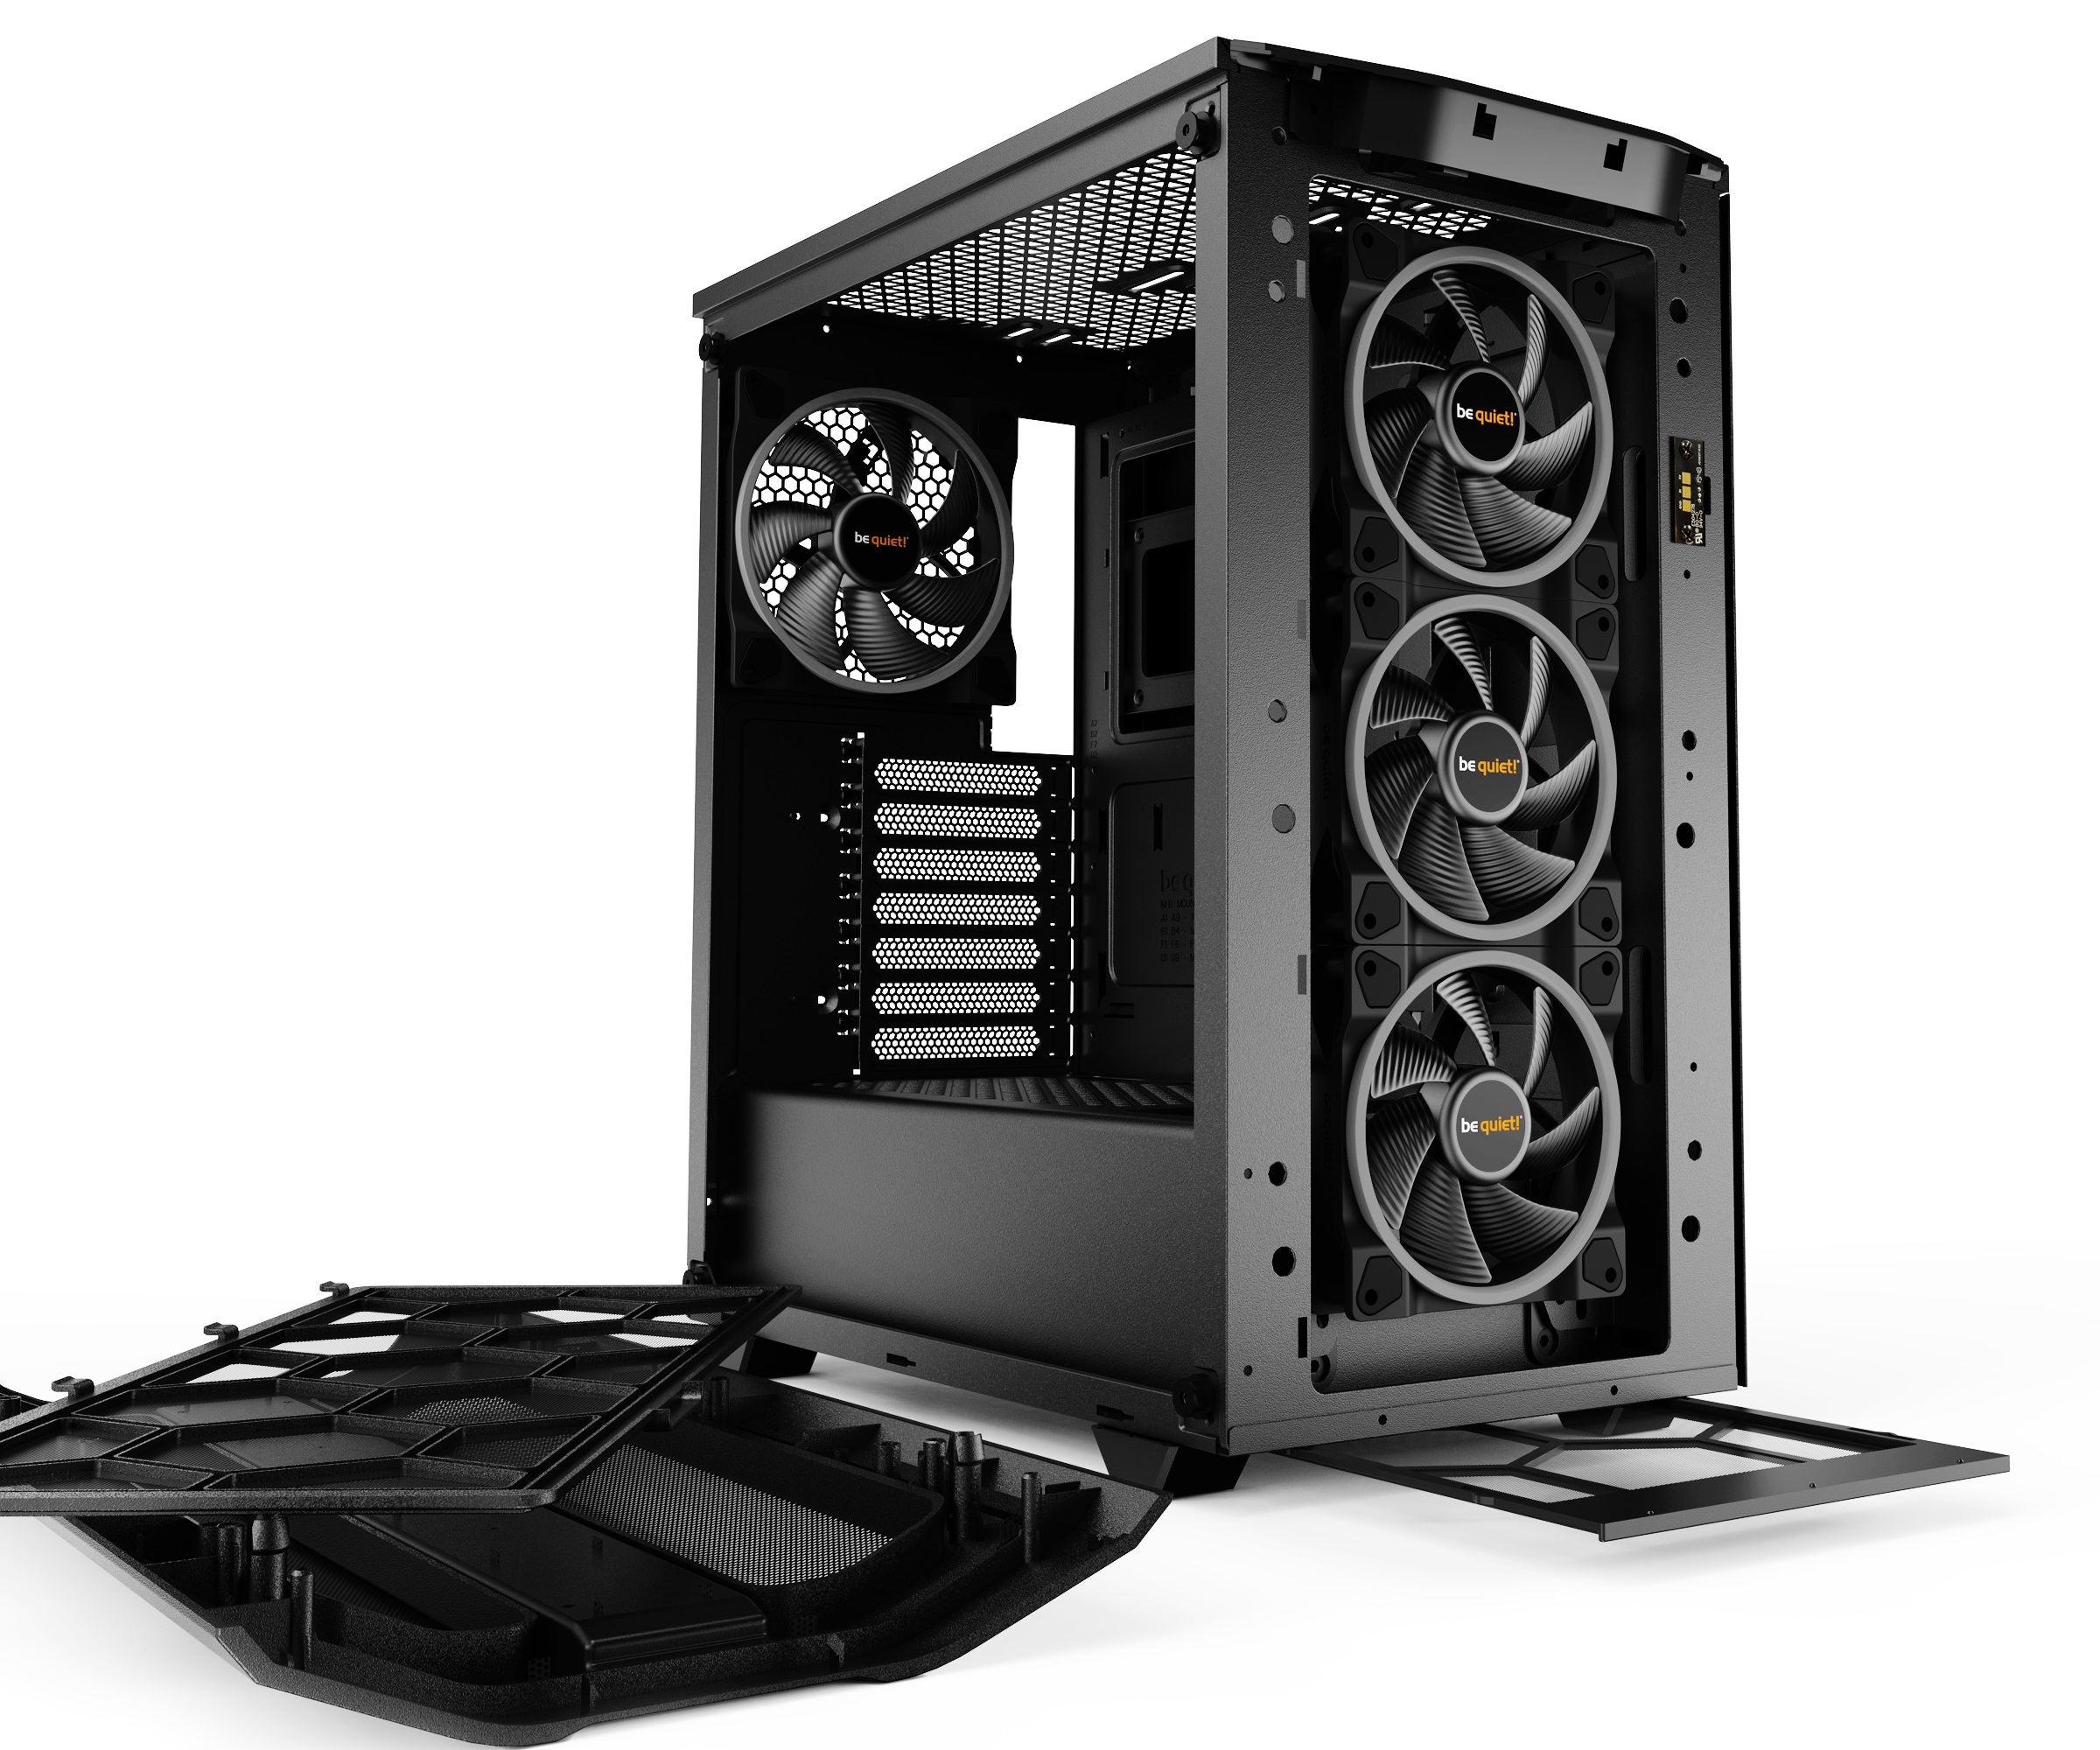 be quiet! - Be Quiet! Pure Base 500 FX Mid Tower Gaming Case - Black